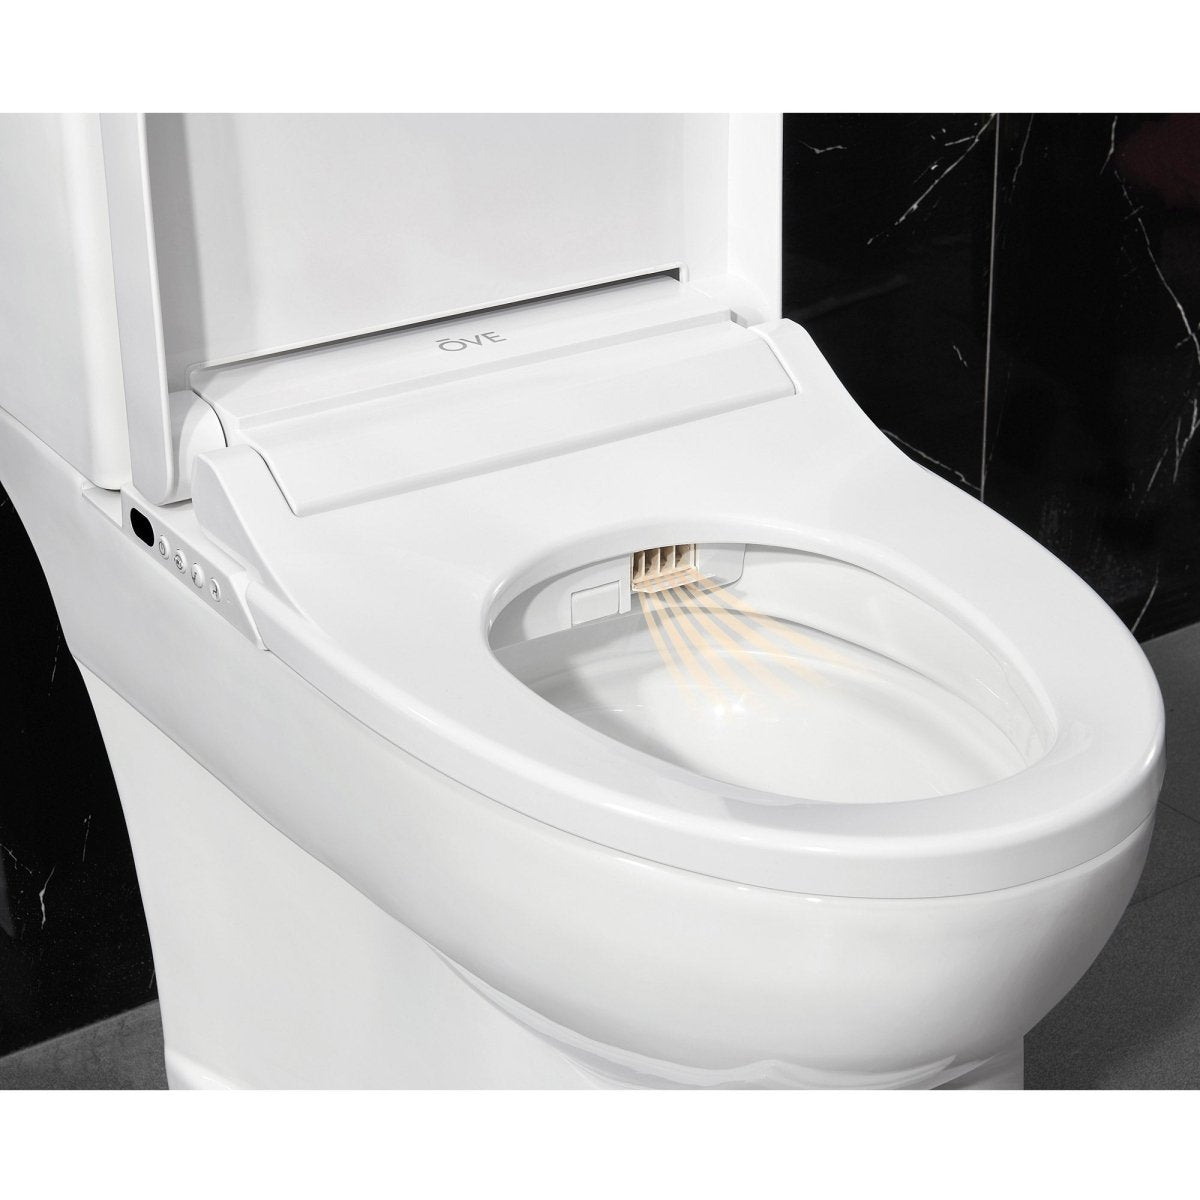 OVE Decors Irenne Elongated Smart Bidet Toilet with Remote Control - Alpine Outlets